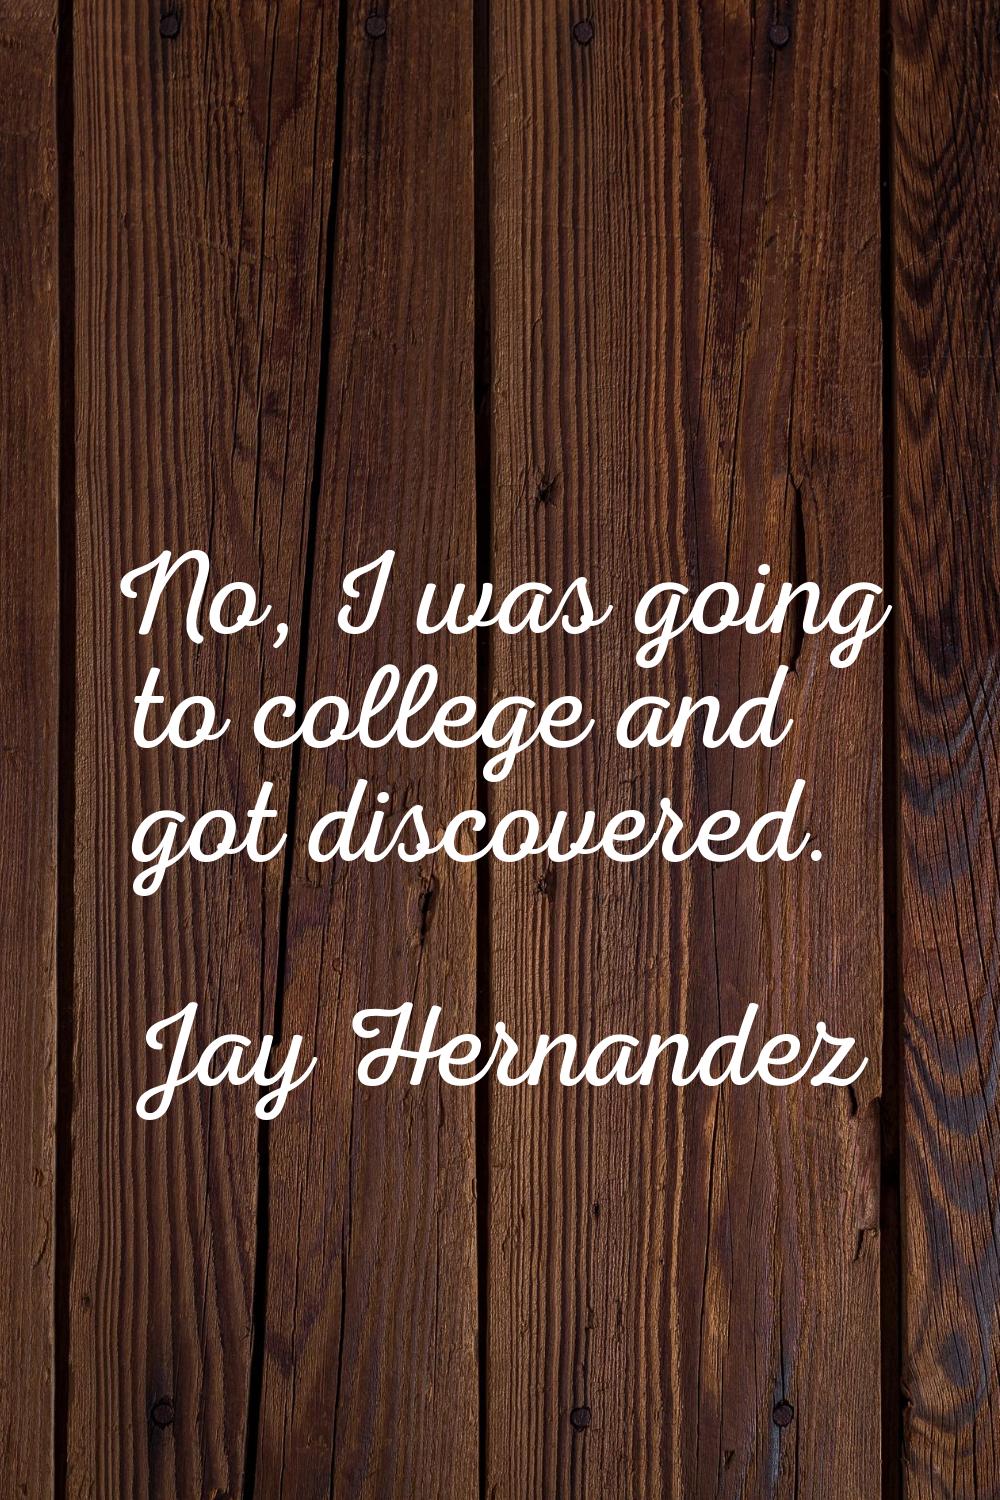 No, I was going to college and got discovered.